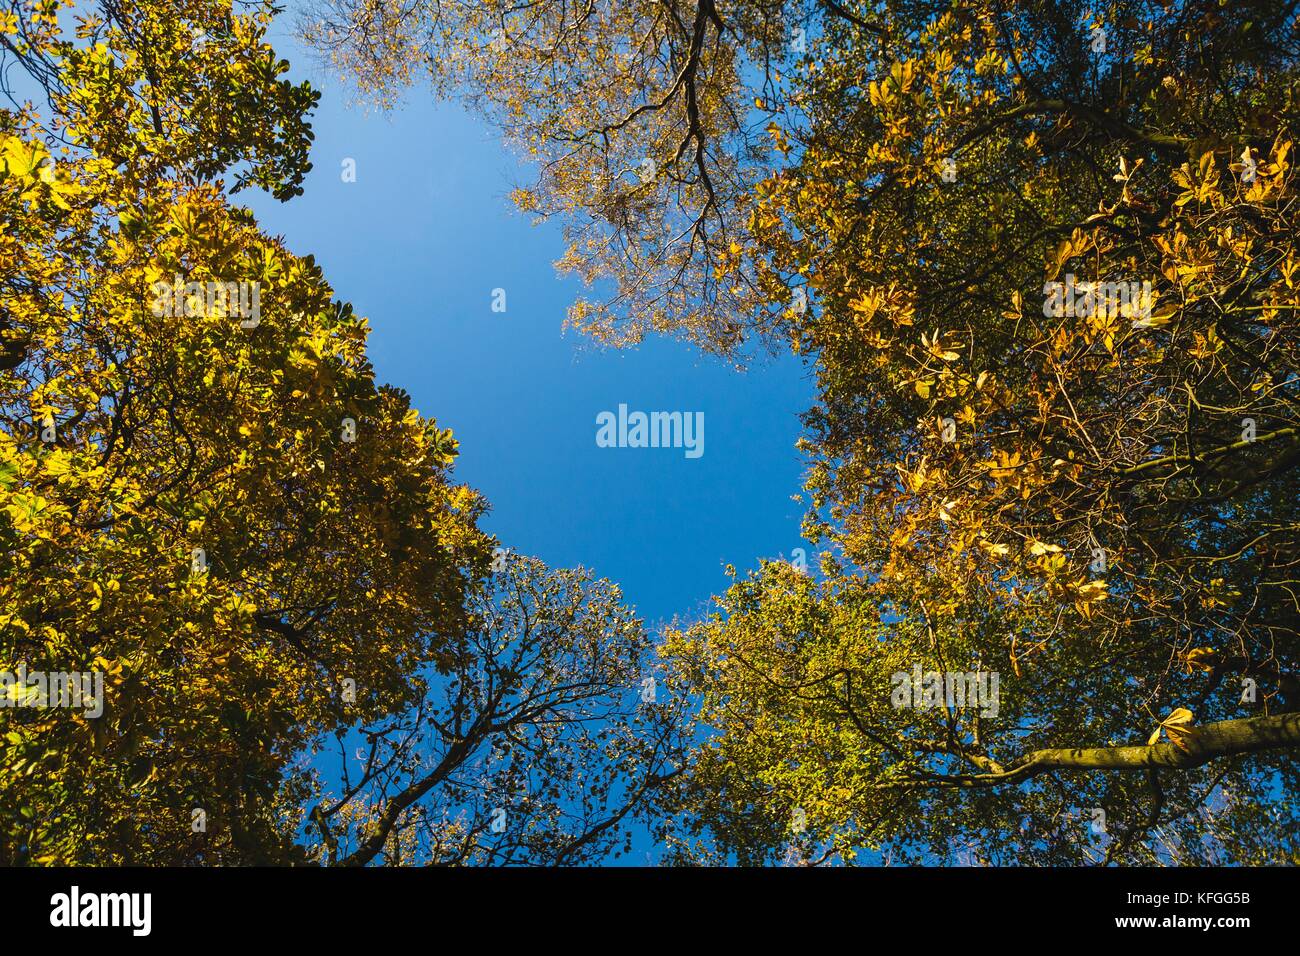 A view up through a canopy of autumn trees to a blue sky. Stock Photo